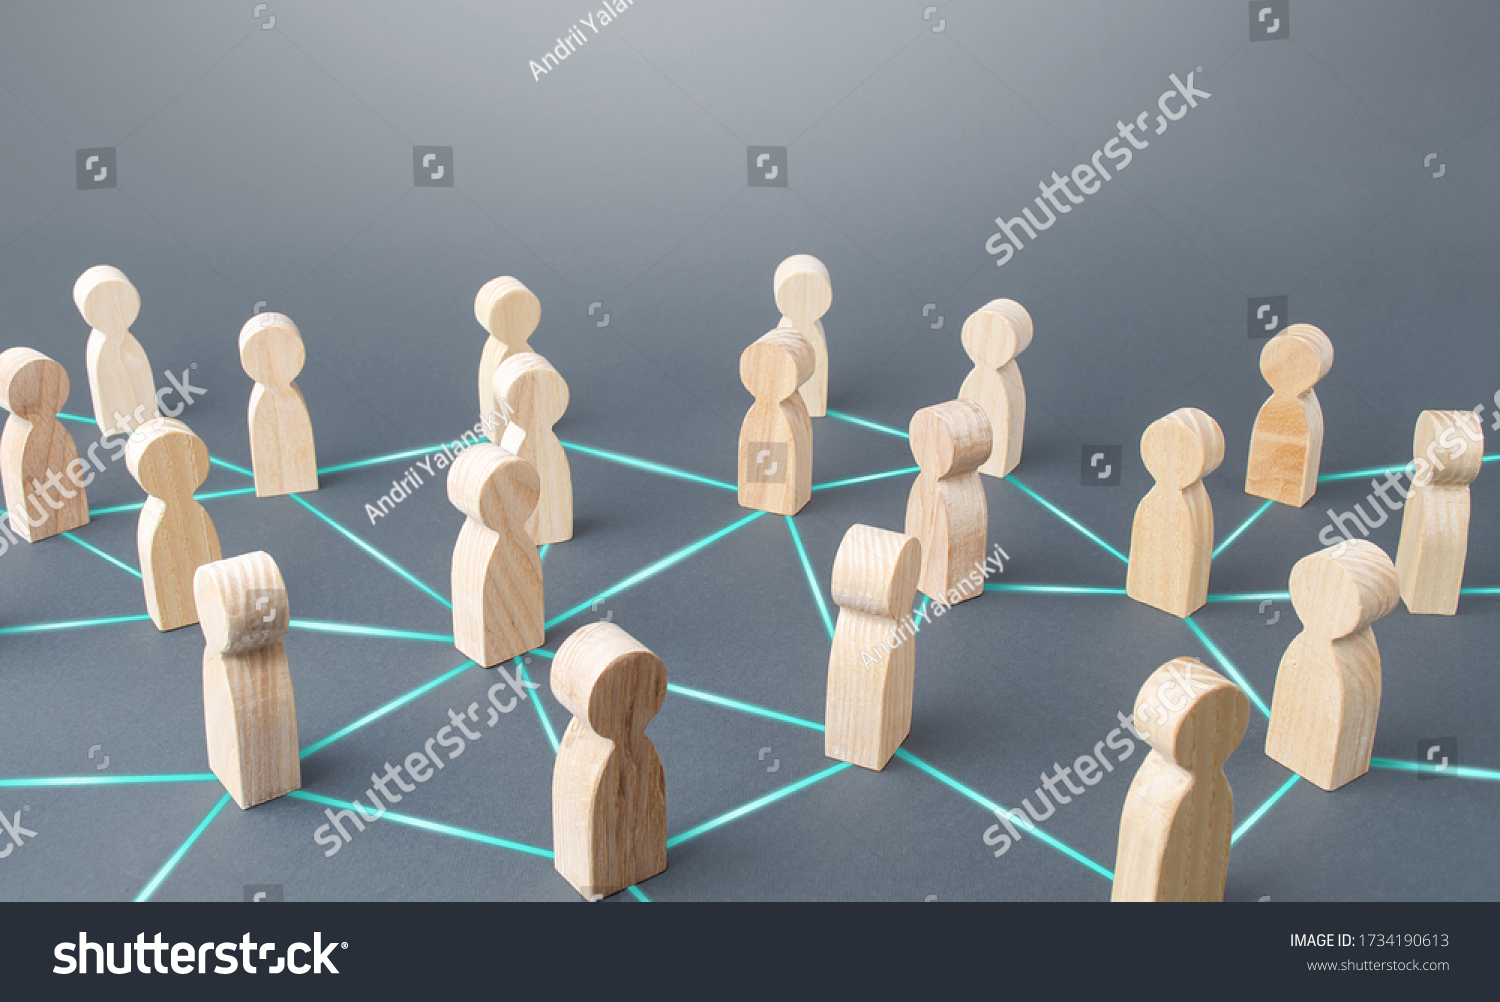 People connected people by lines. Society concept. Social science relationships. Teamwork. Cooperation and collaboration, news gossip spread. Marketing, dissemination of trends and information #1734190613